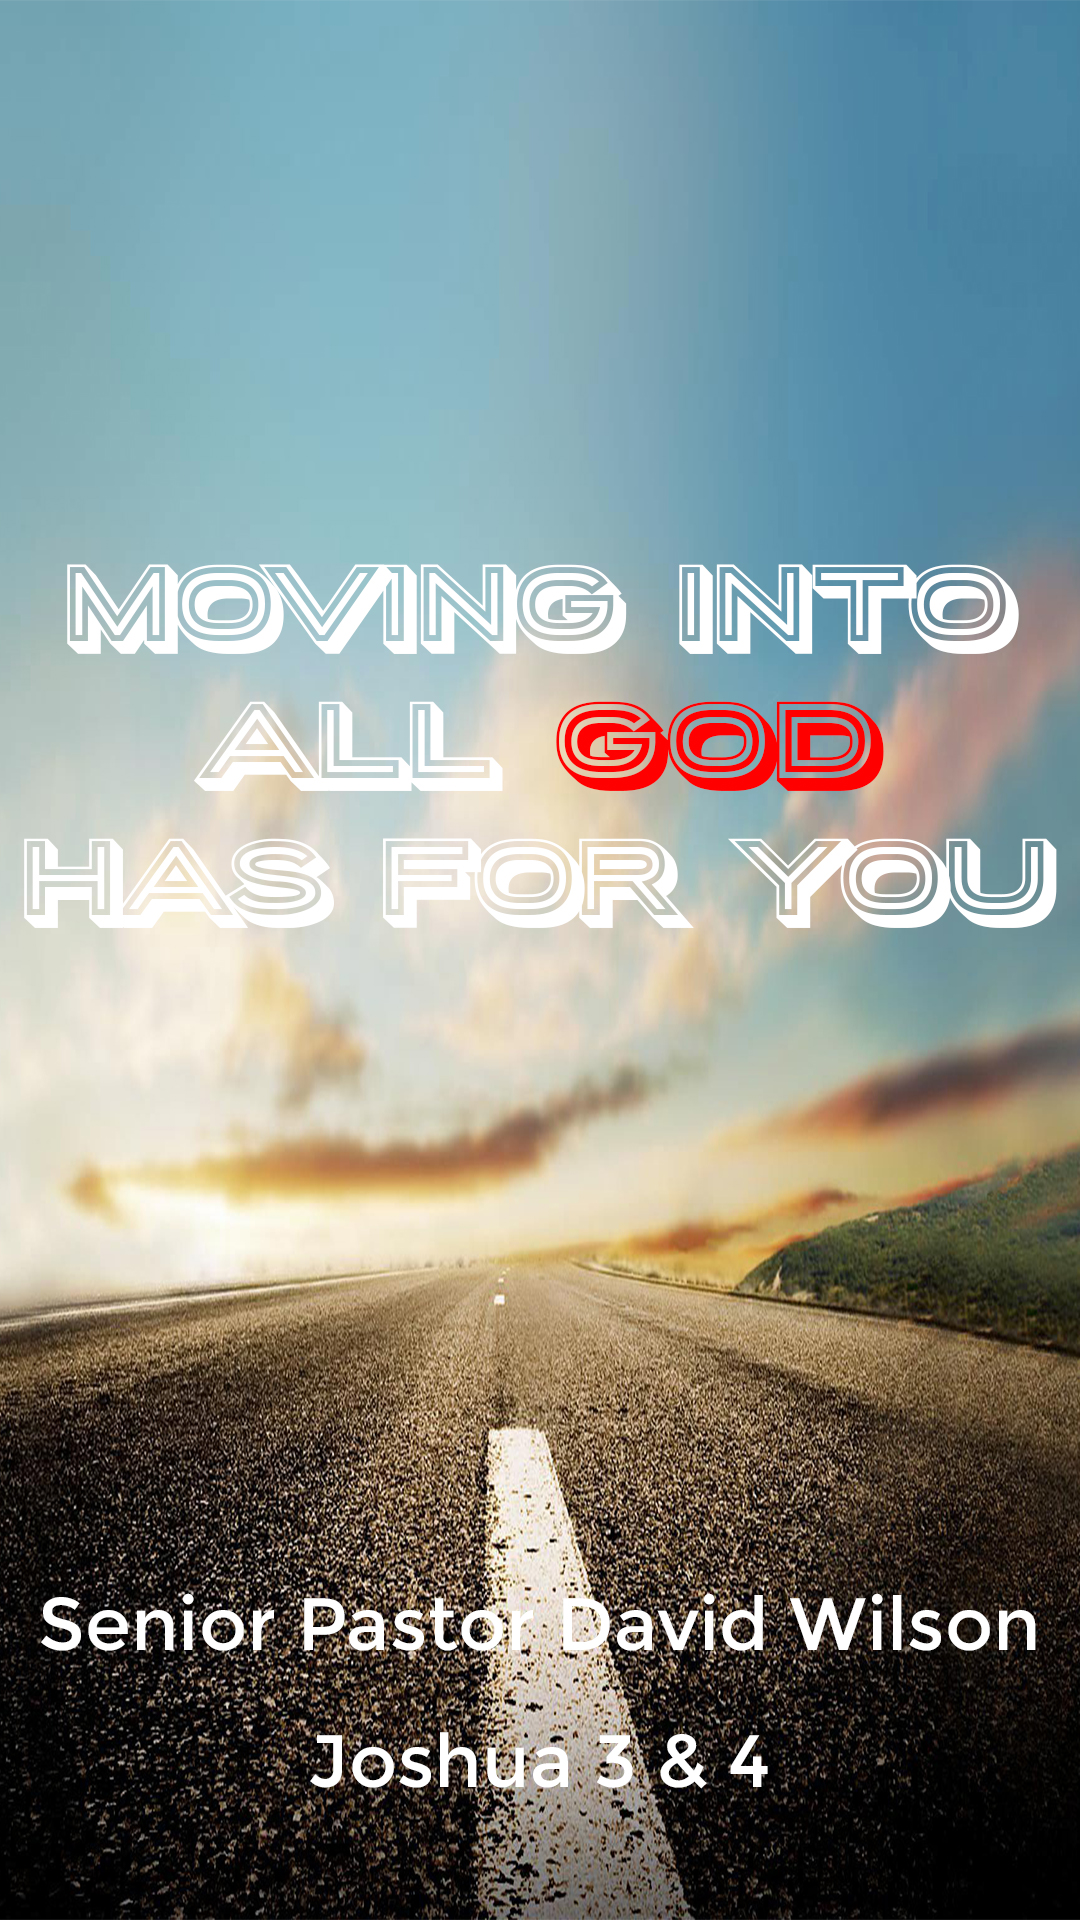 Moving into all God has for you